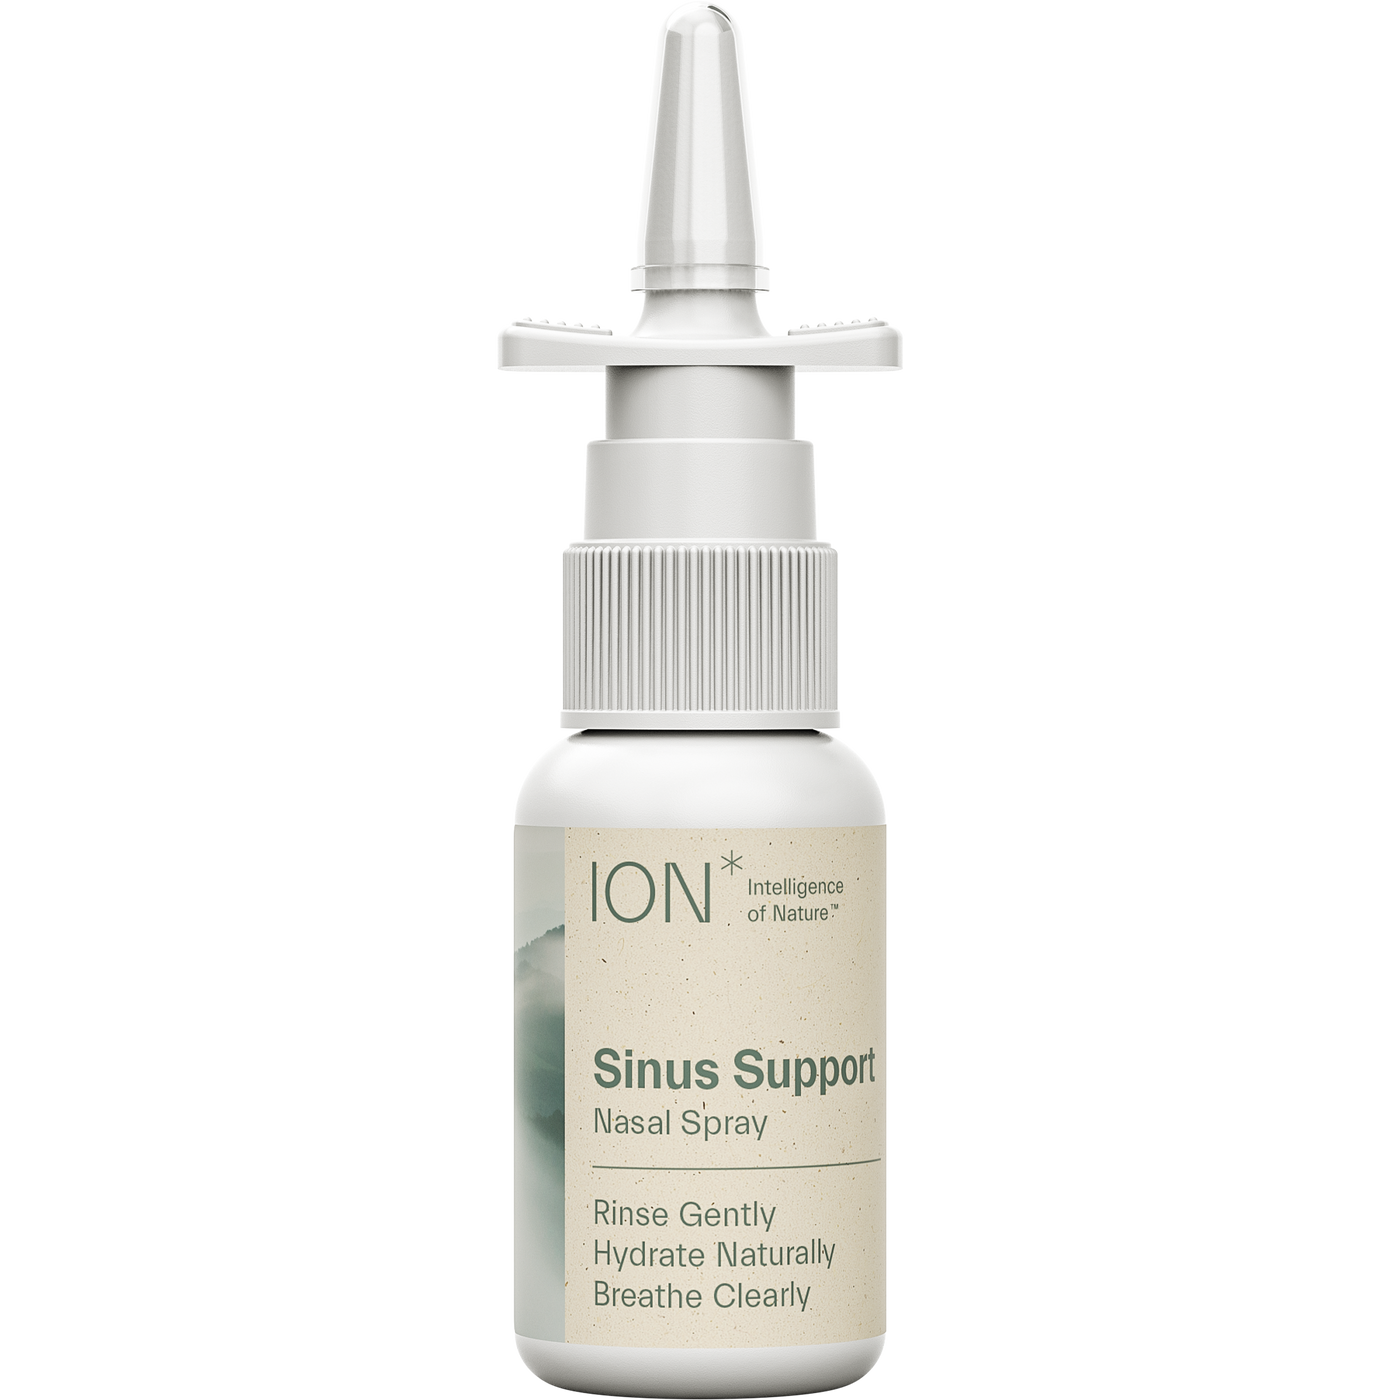 ION* Sinus Support 1 fl oz Curated Wellness